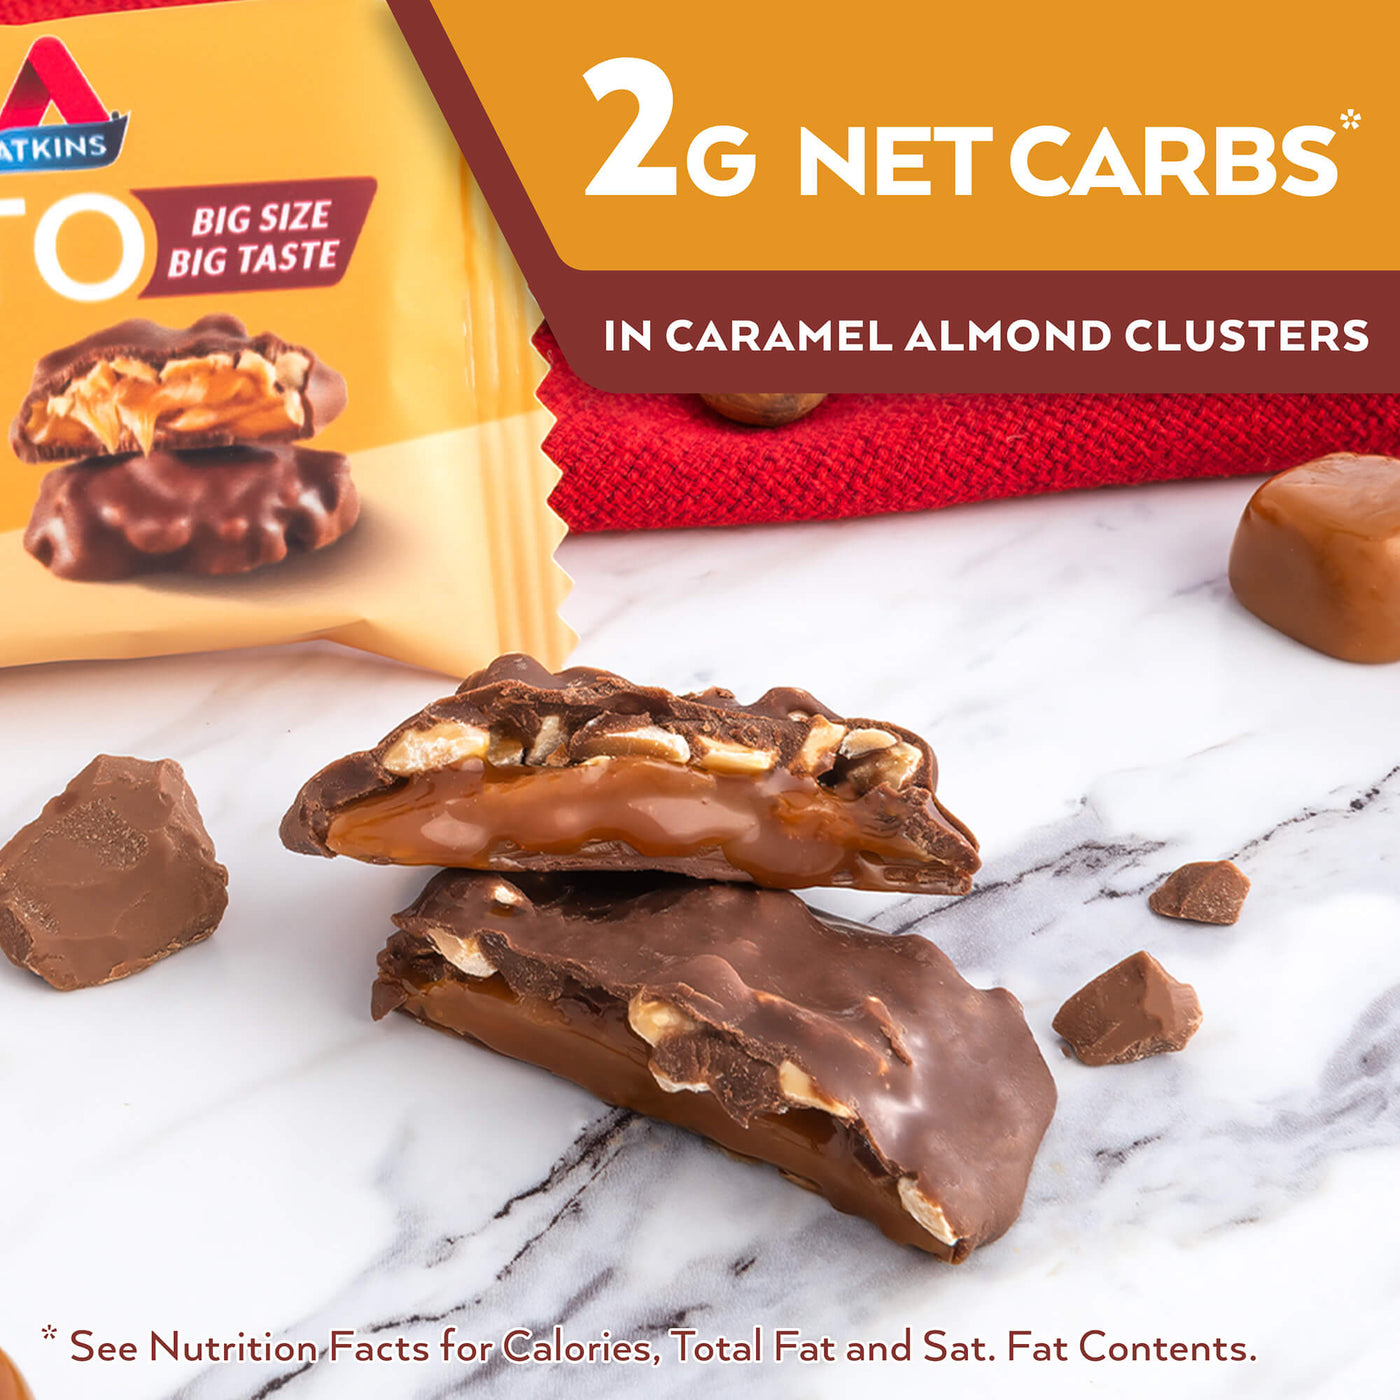 Caramel Almond Clusters. 2g net carbs* in caramel almond clusters. *see Nutrition Facts for calories, Total fat and Sat. Fat contents.